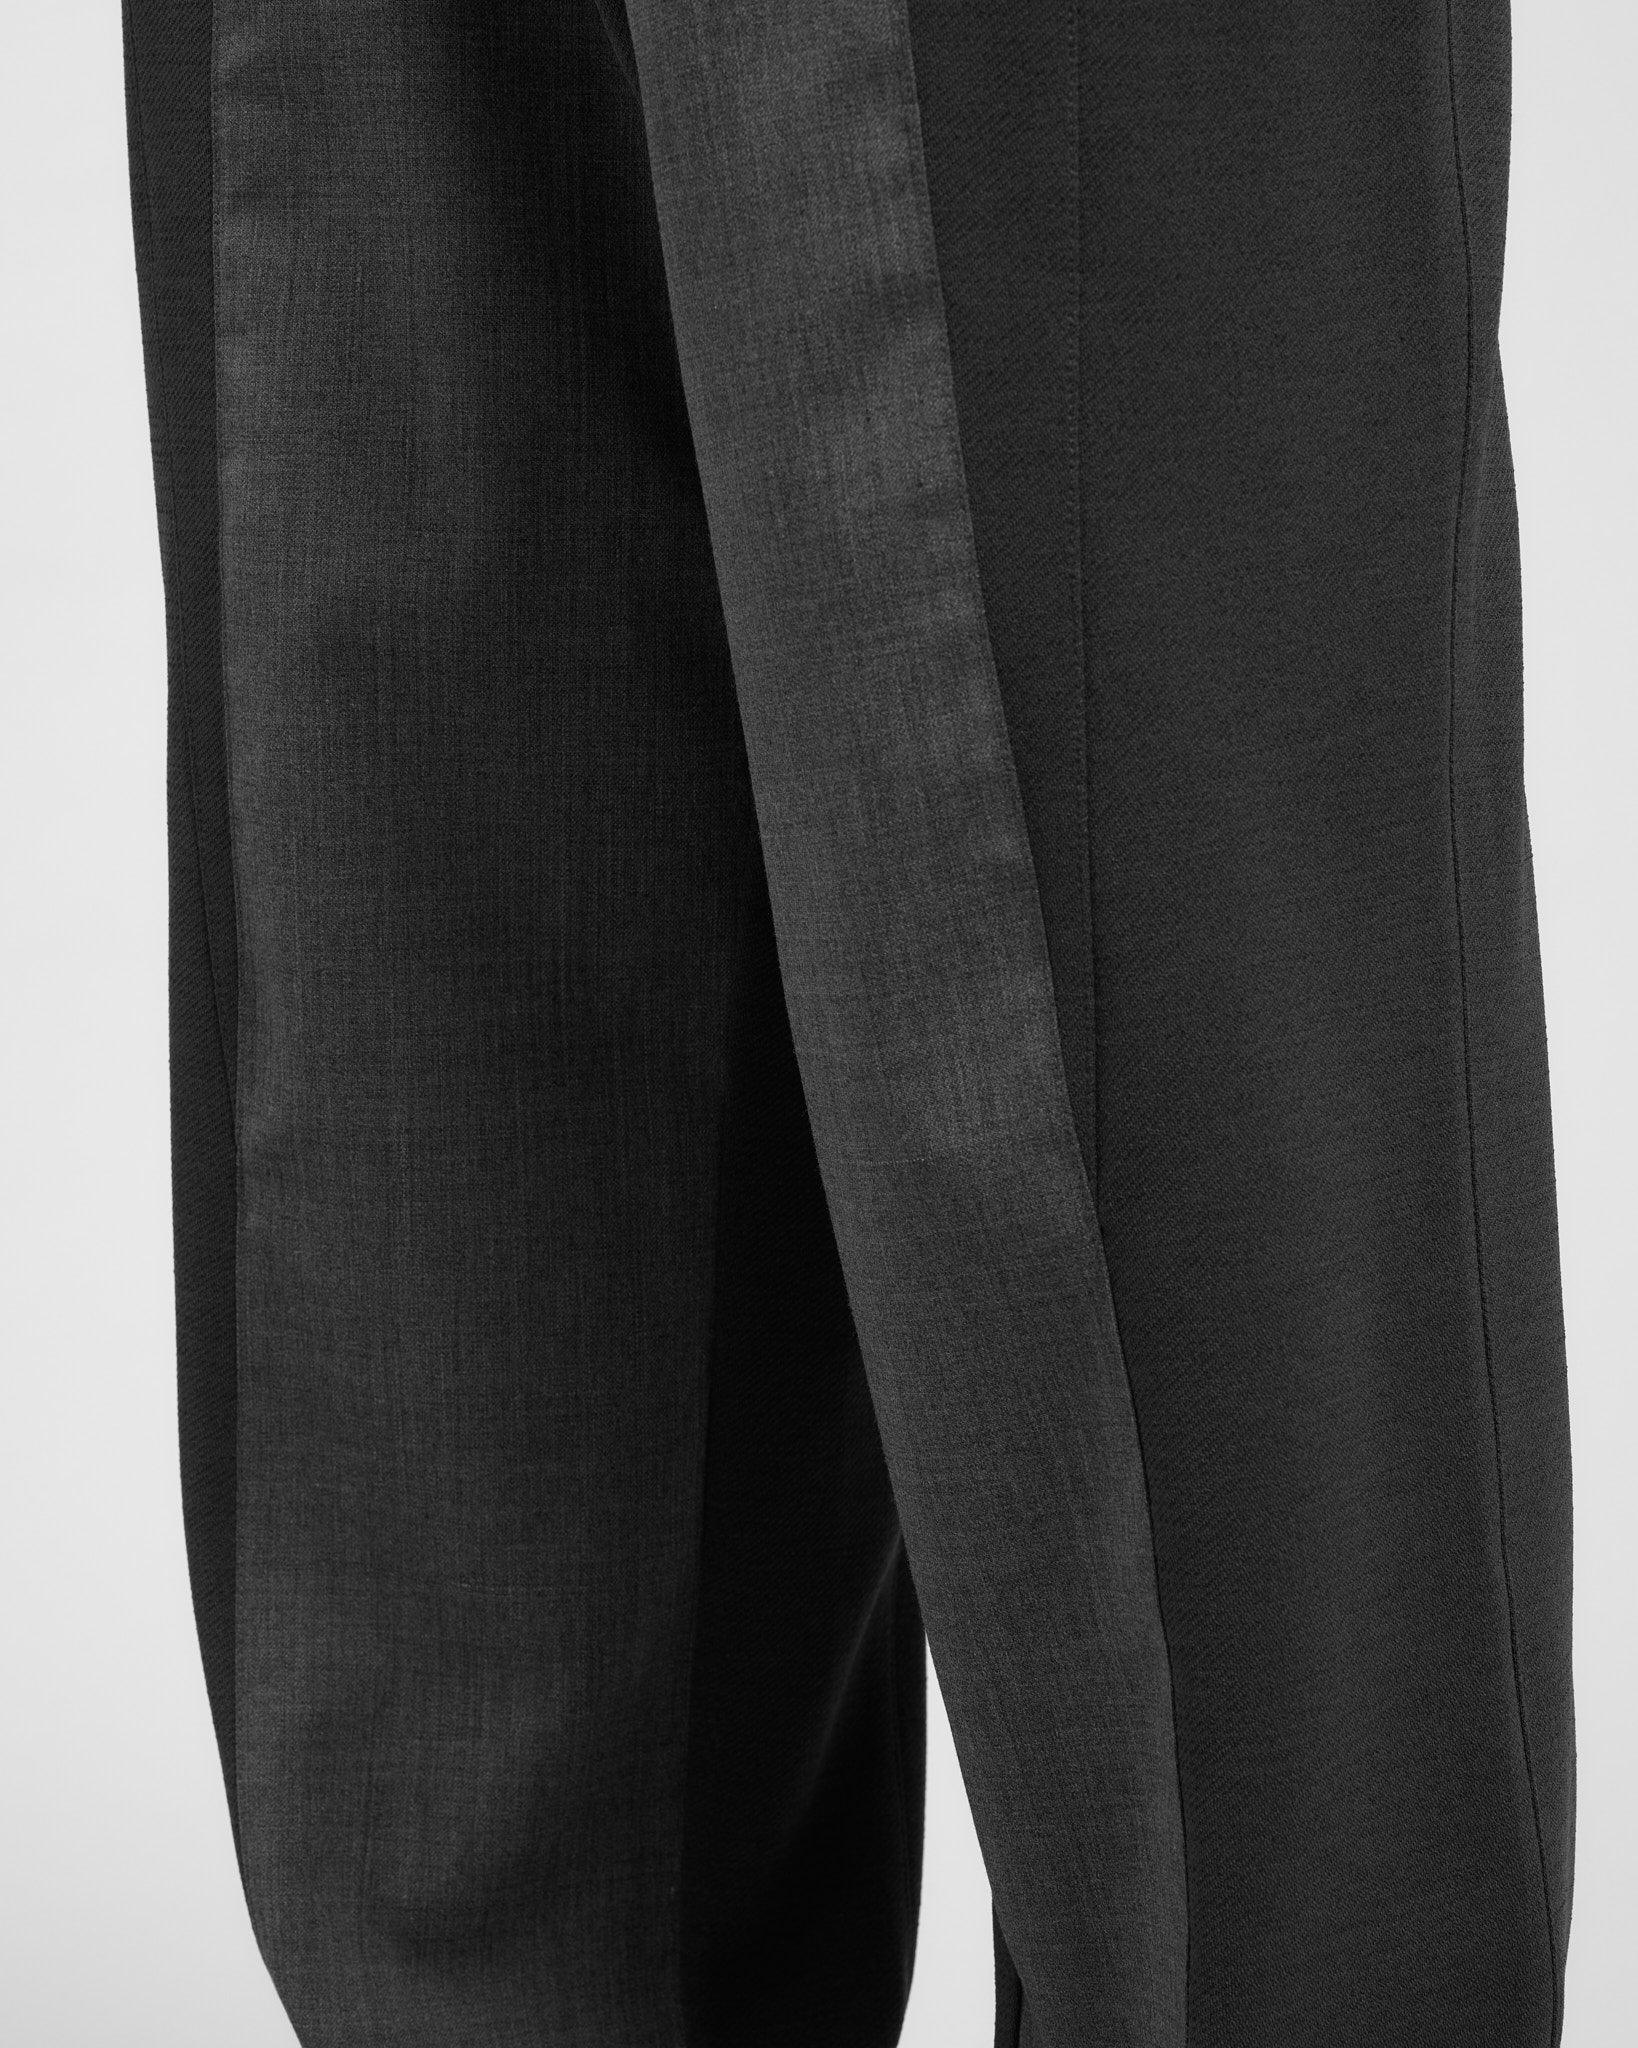 Balla Tailored Trouser - Balla Tailored Trouser - Chinatown Country Club 